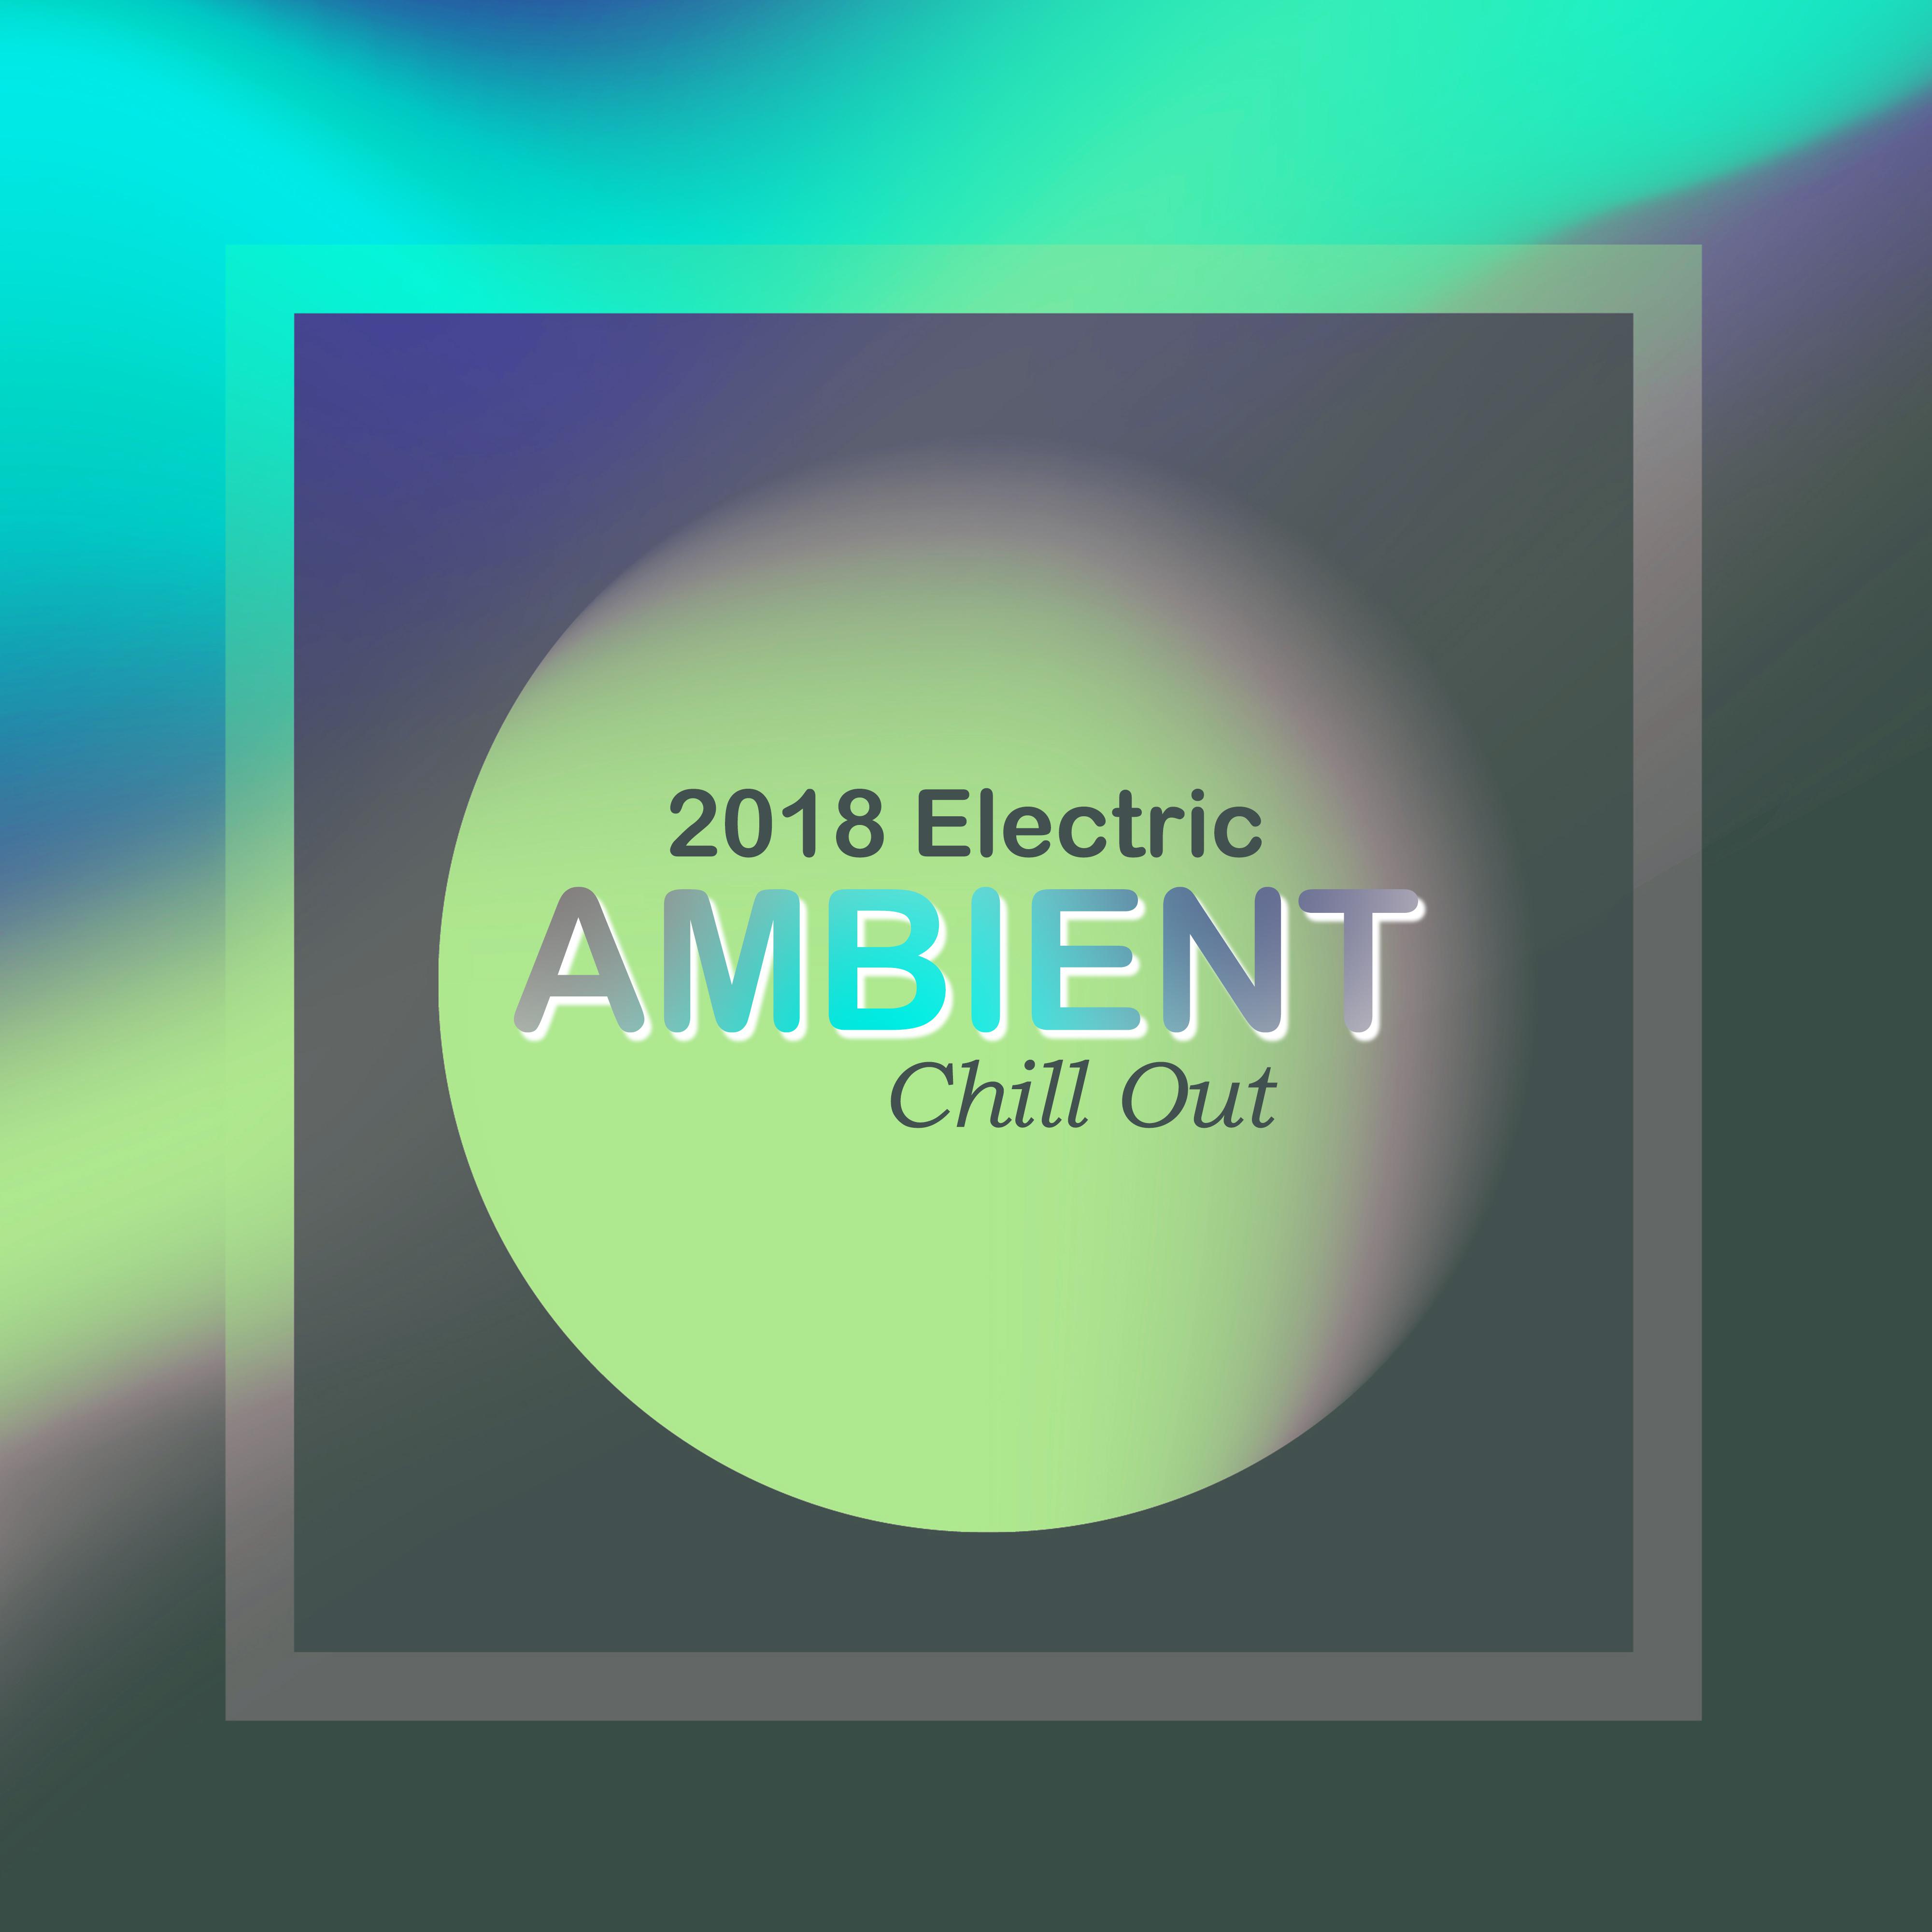 2018 Electric Ambient Chill Out